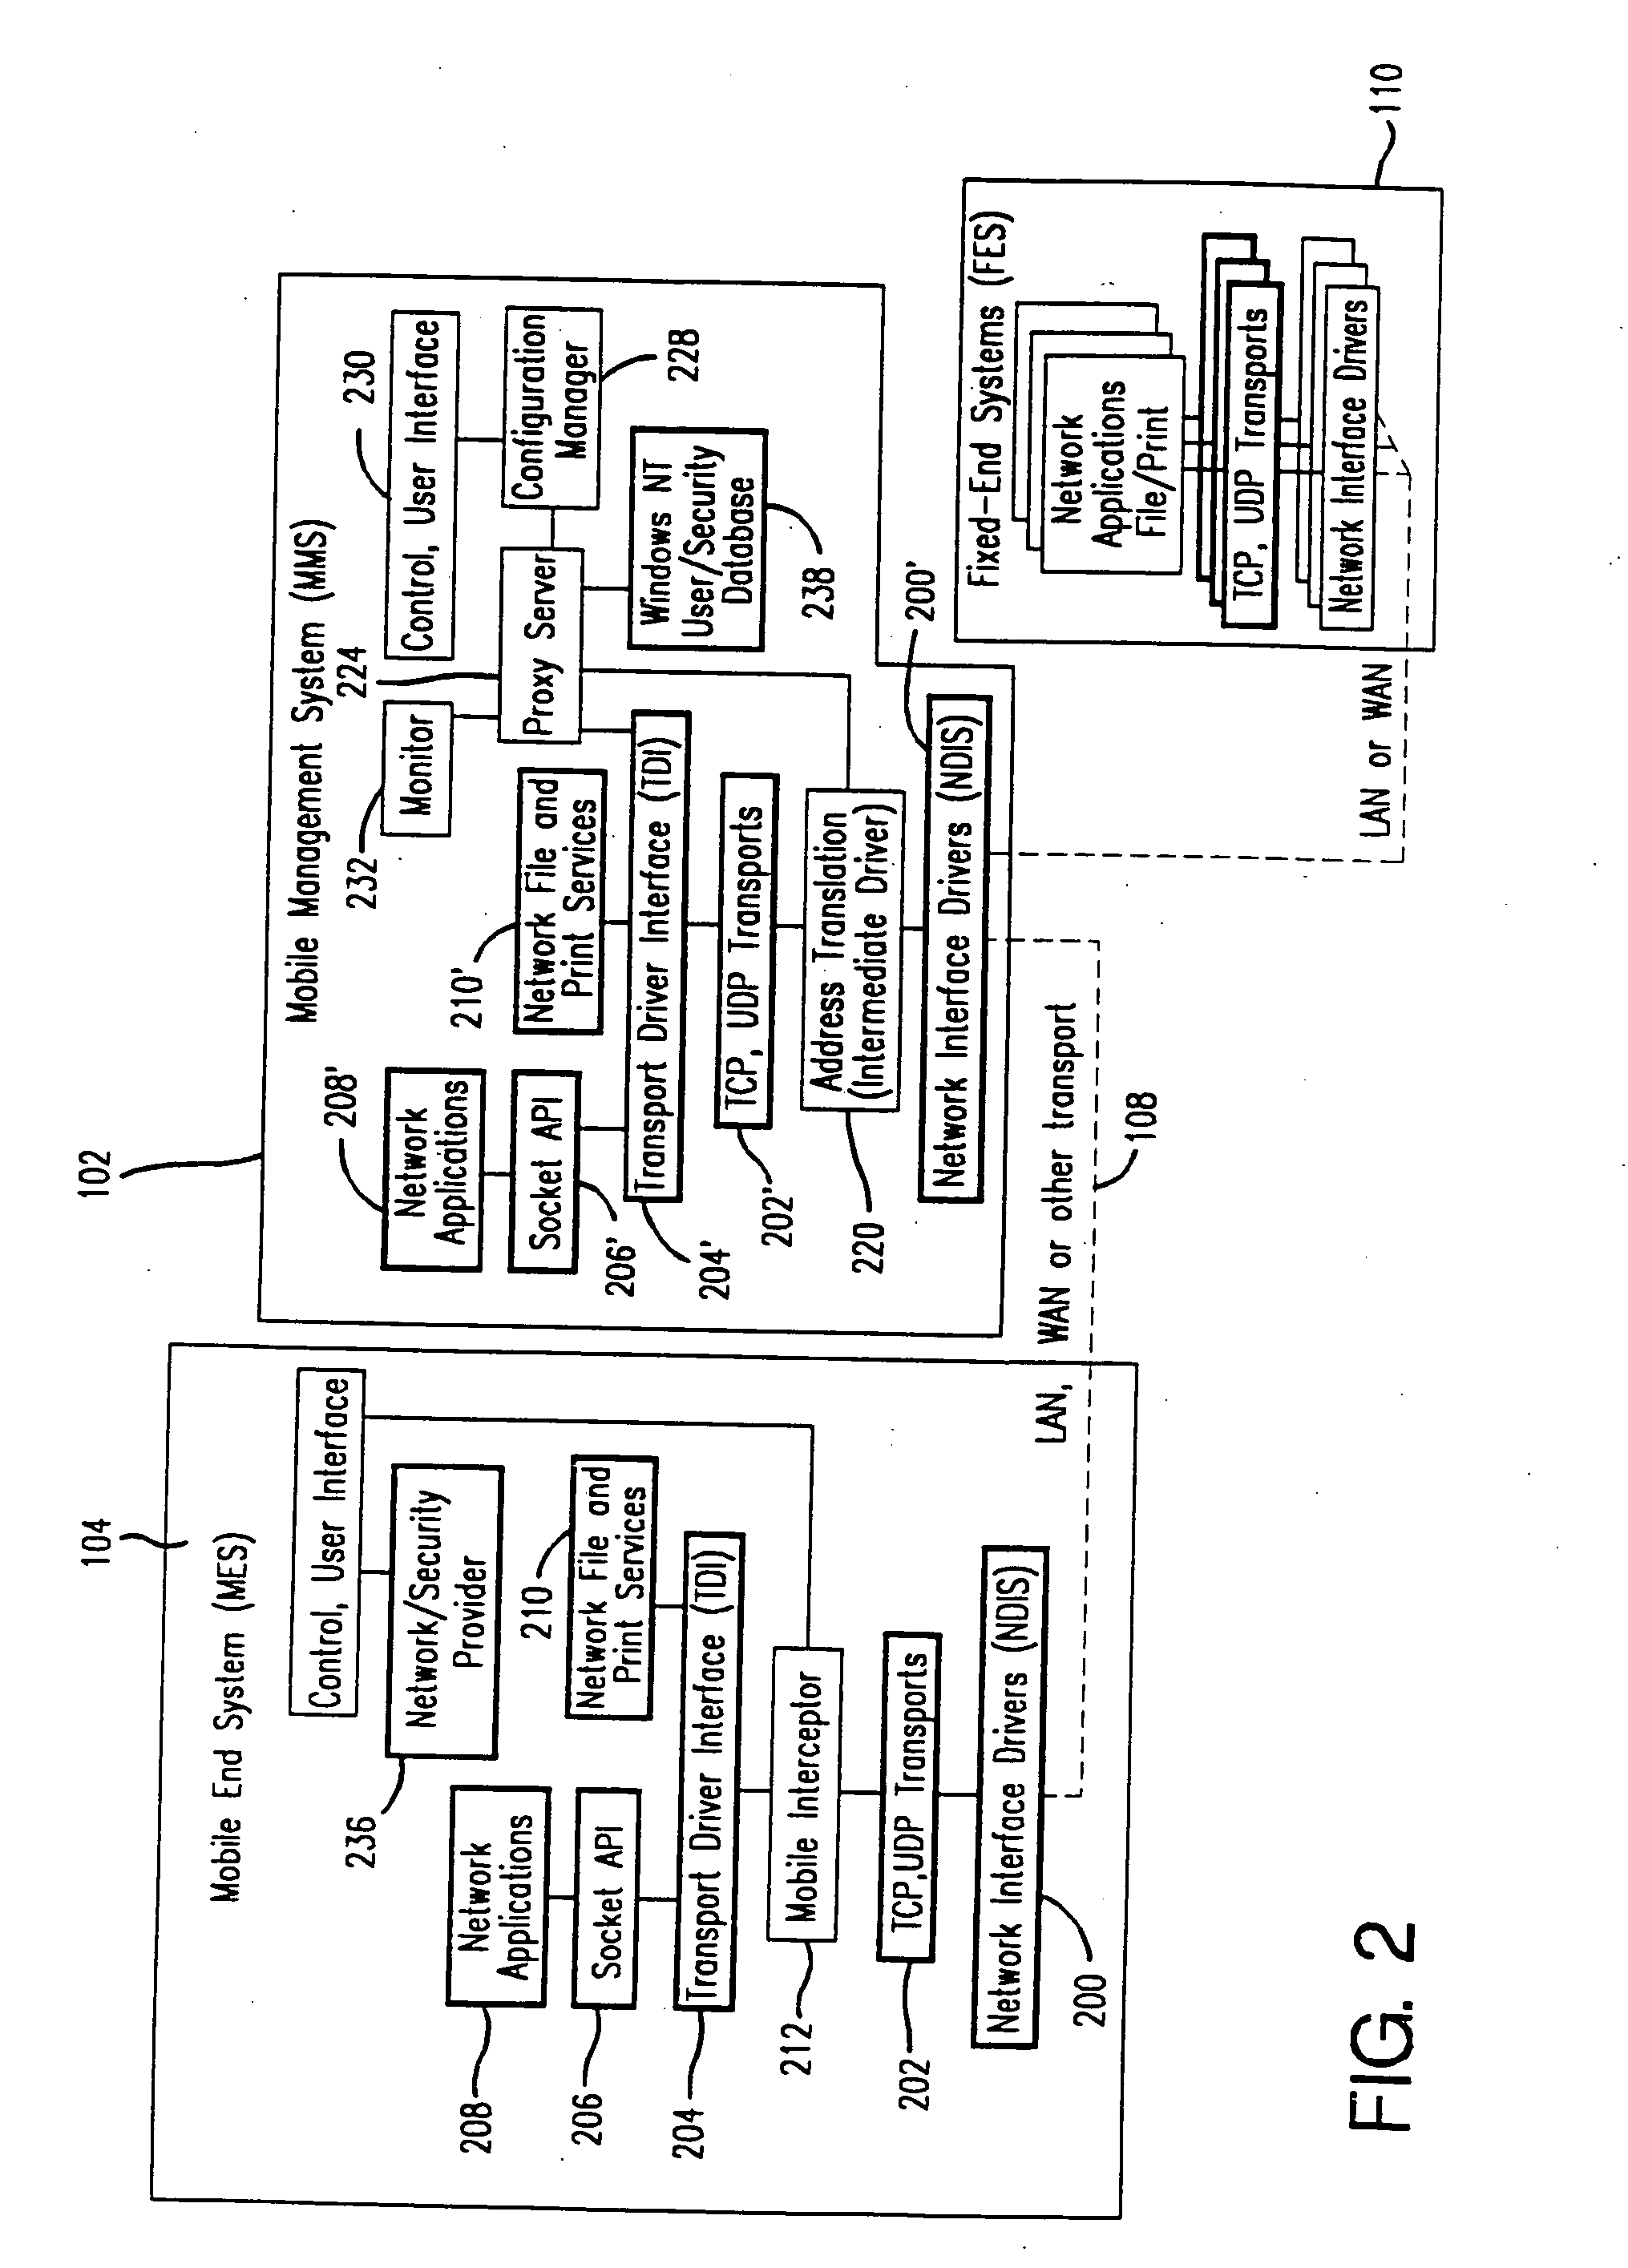 Mobile networking system and method